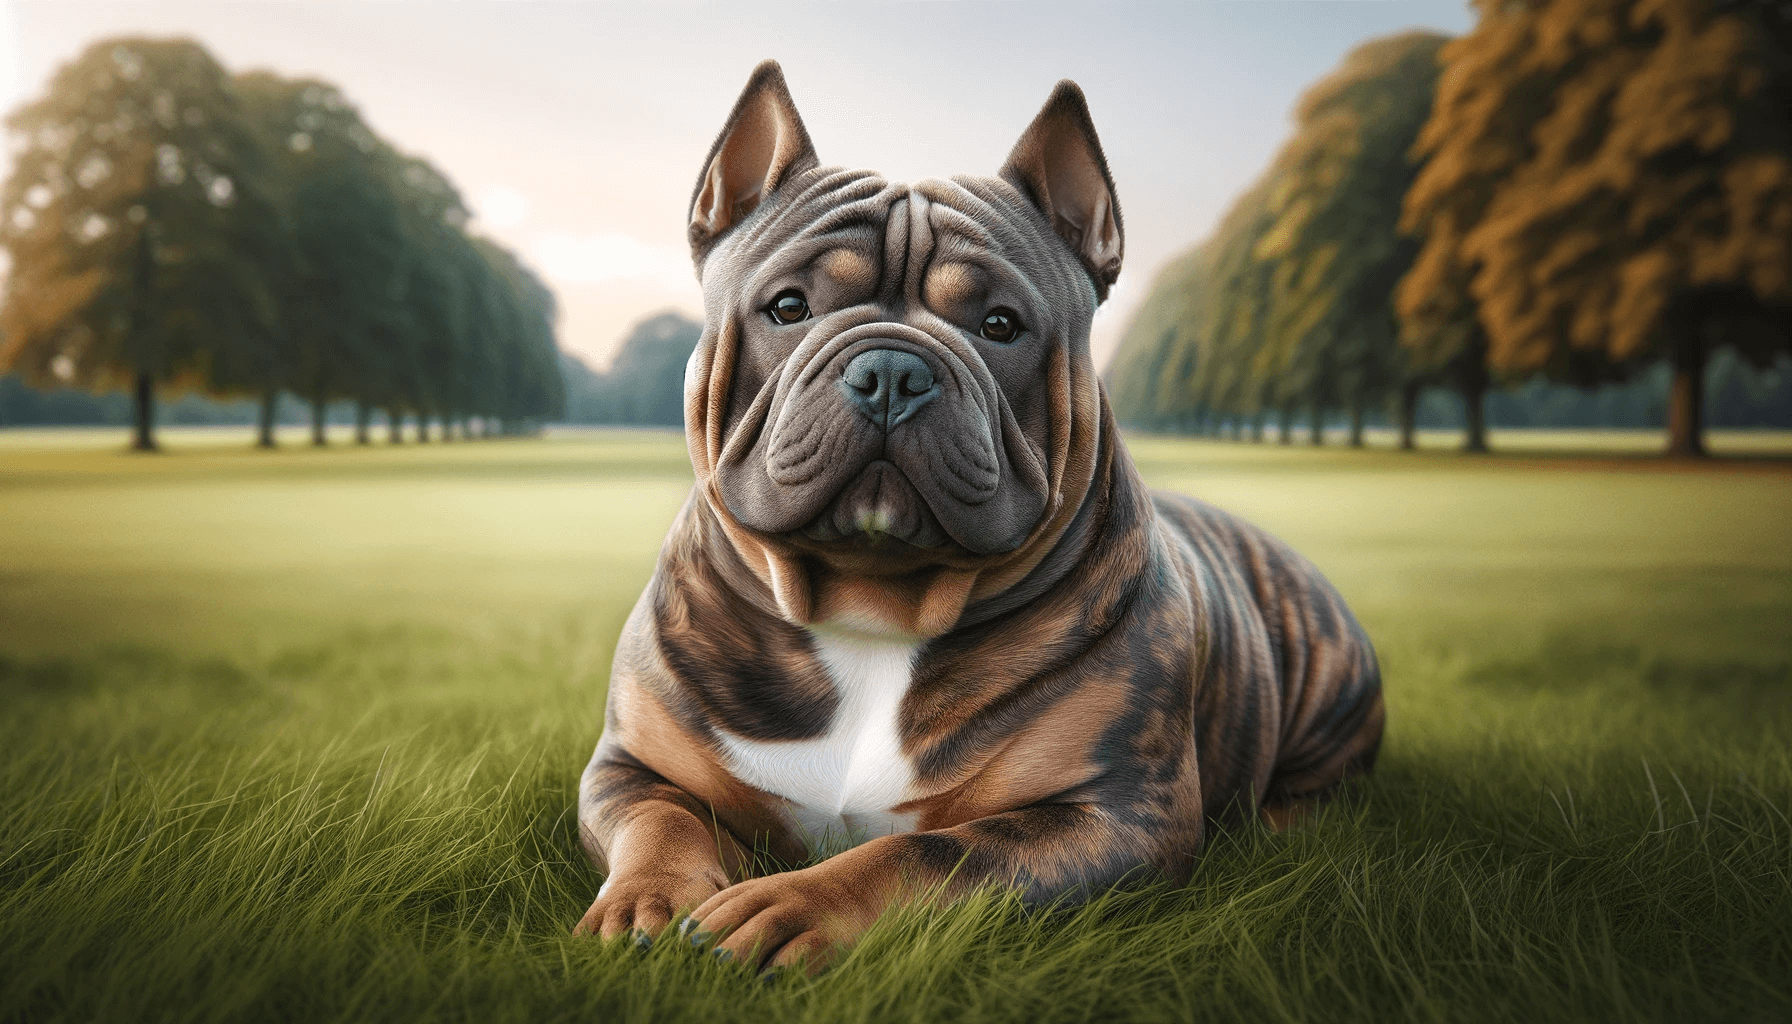 Exotic Bully lying in a grassy field showing a calm and self-assured expression.